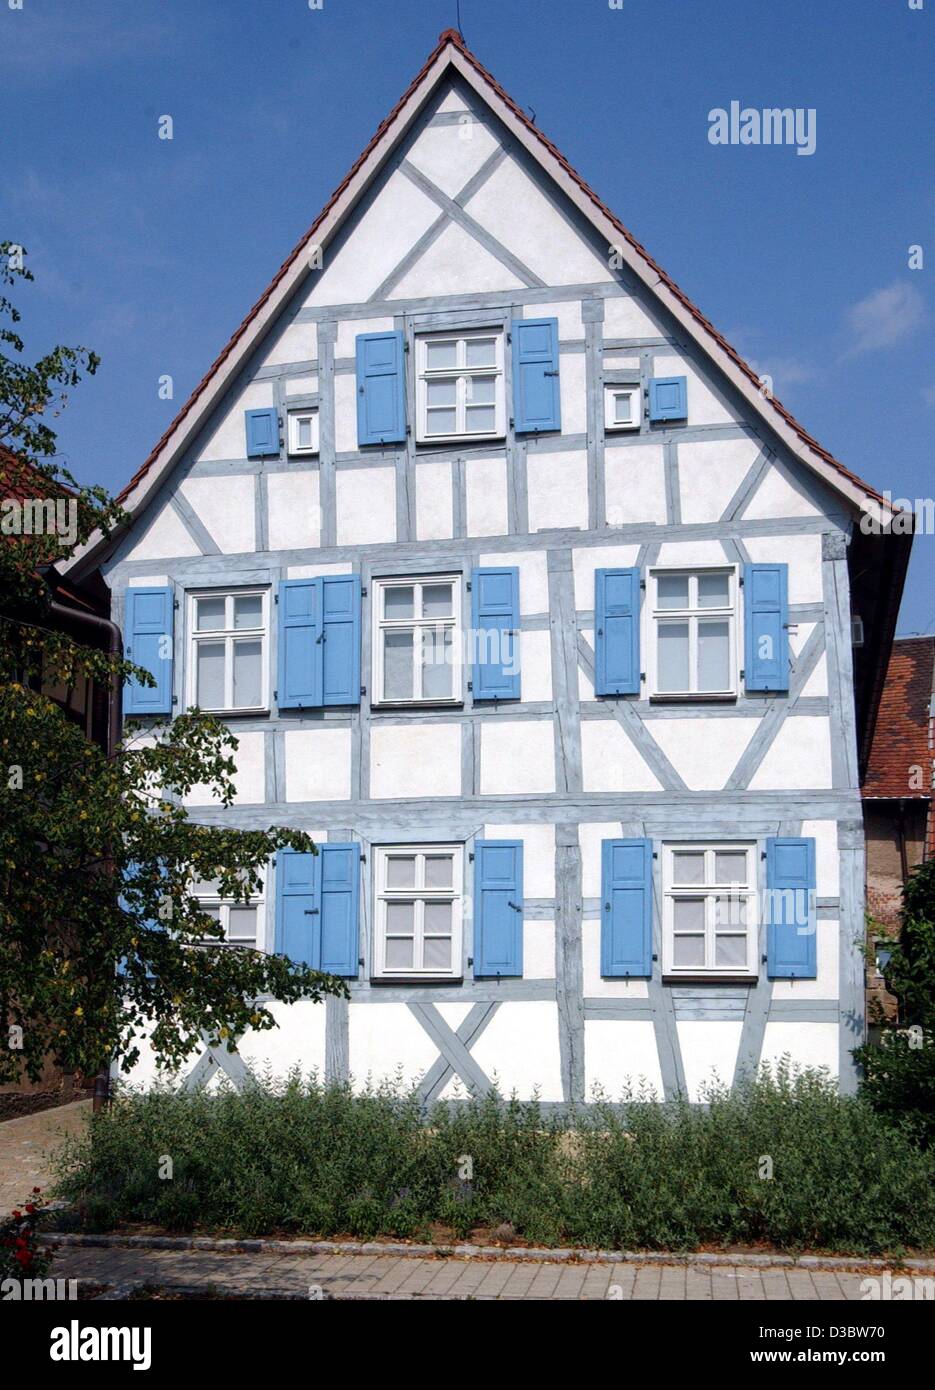 dpa) - A view of the birth place of Levi Strauss in Buttenheim, Germany, 20  August 2003. A museum was opened at the birth place of the legendary jeans  inventor in 2000.